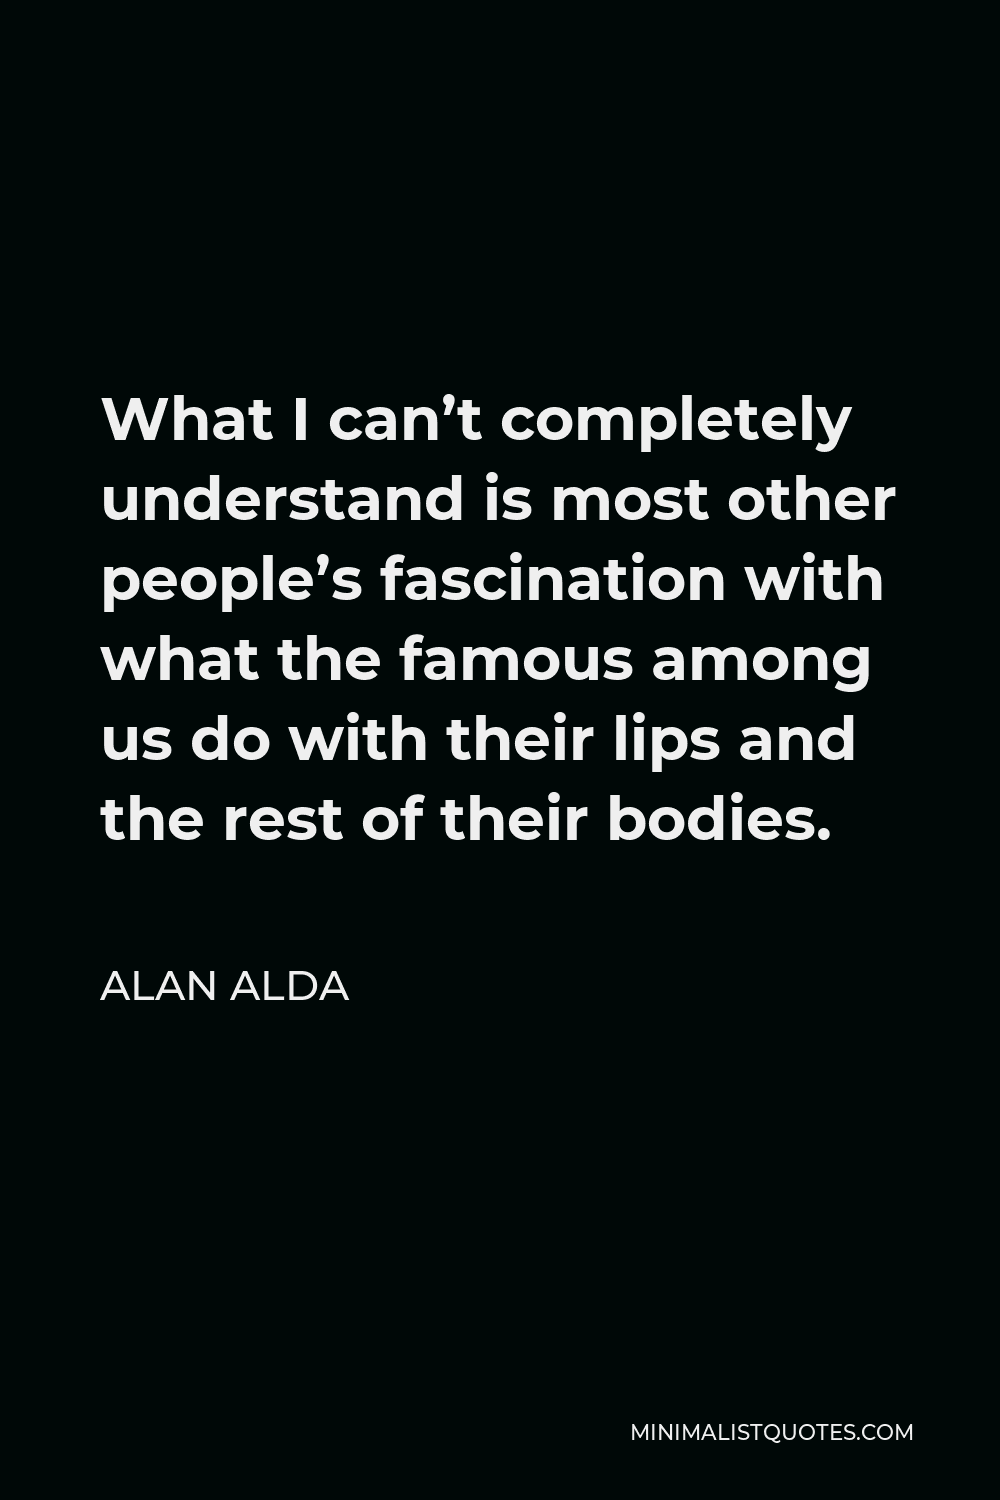 Alan Alda Quote - What I can’t completely understand is most other people’s fascination with what the famous among us do with their lips and the rest of their bodies.